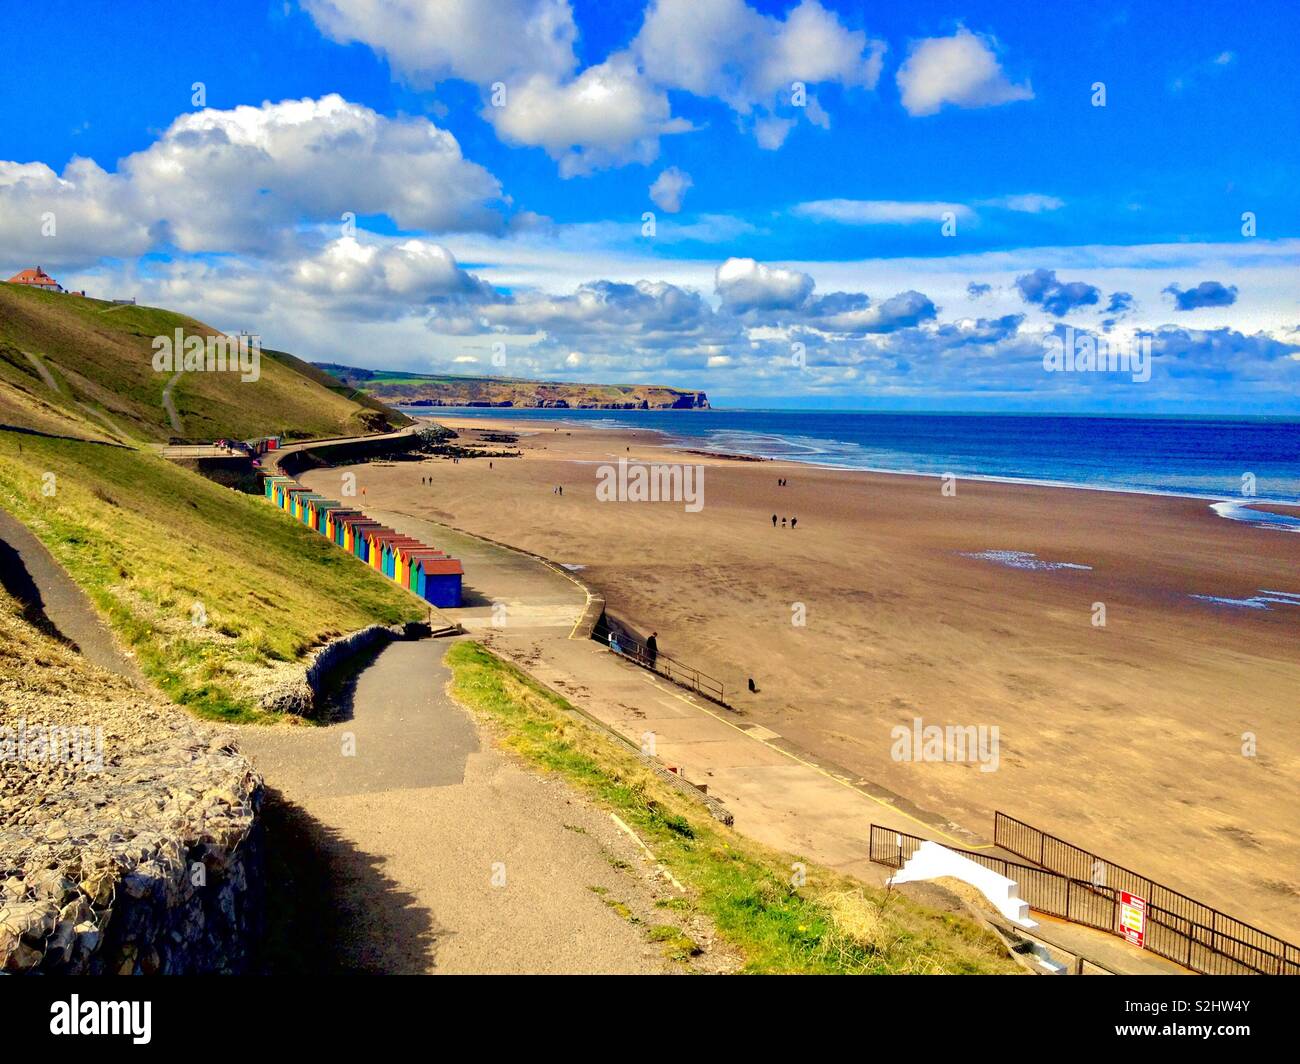 Colourful beach huts on a sandy beach with beautiful blue sea and skies Stock Photo